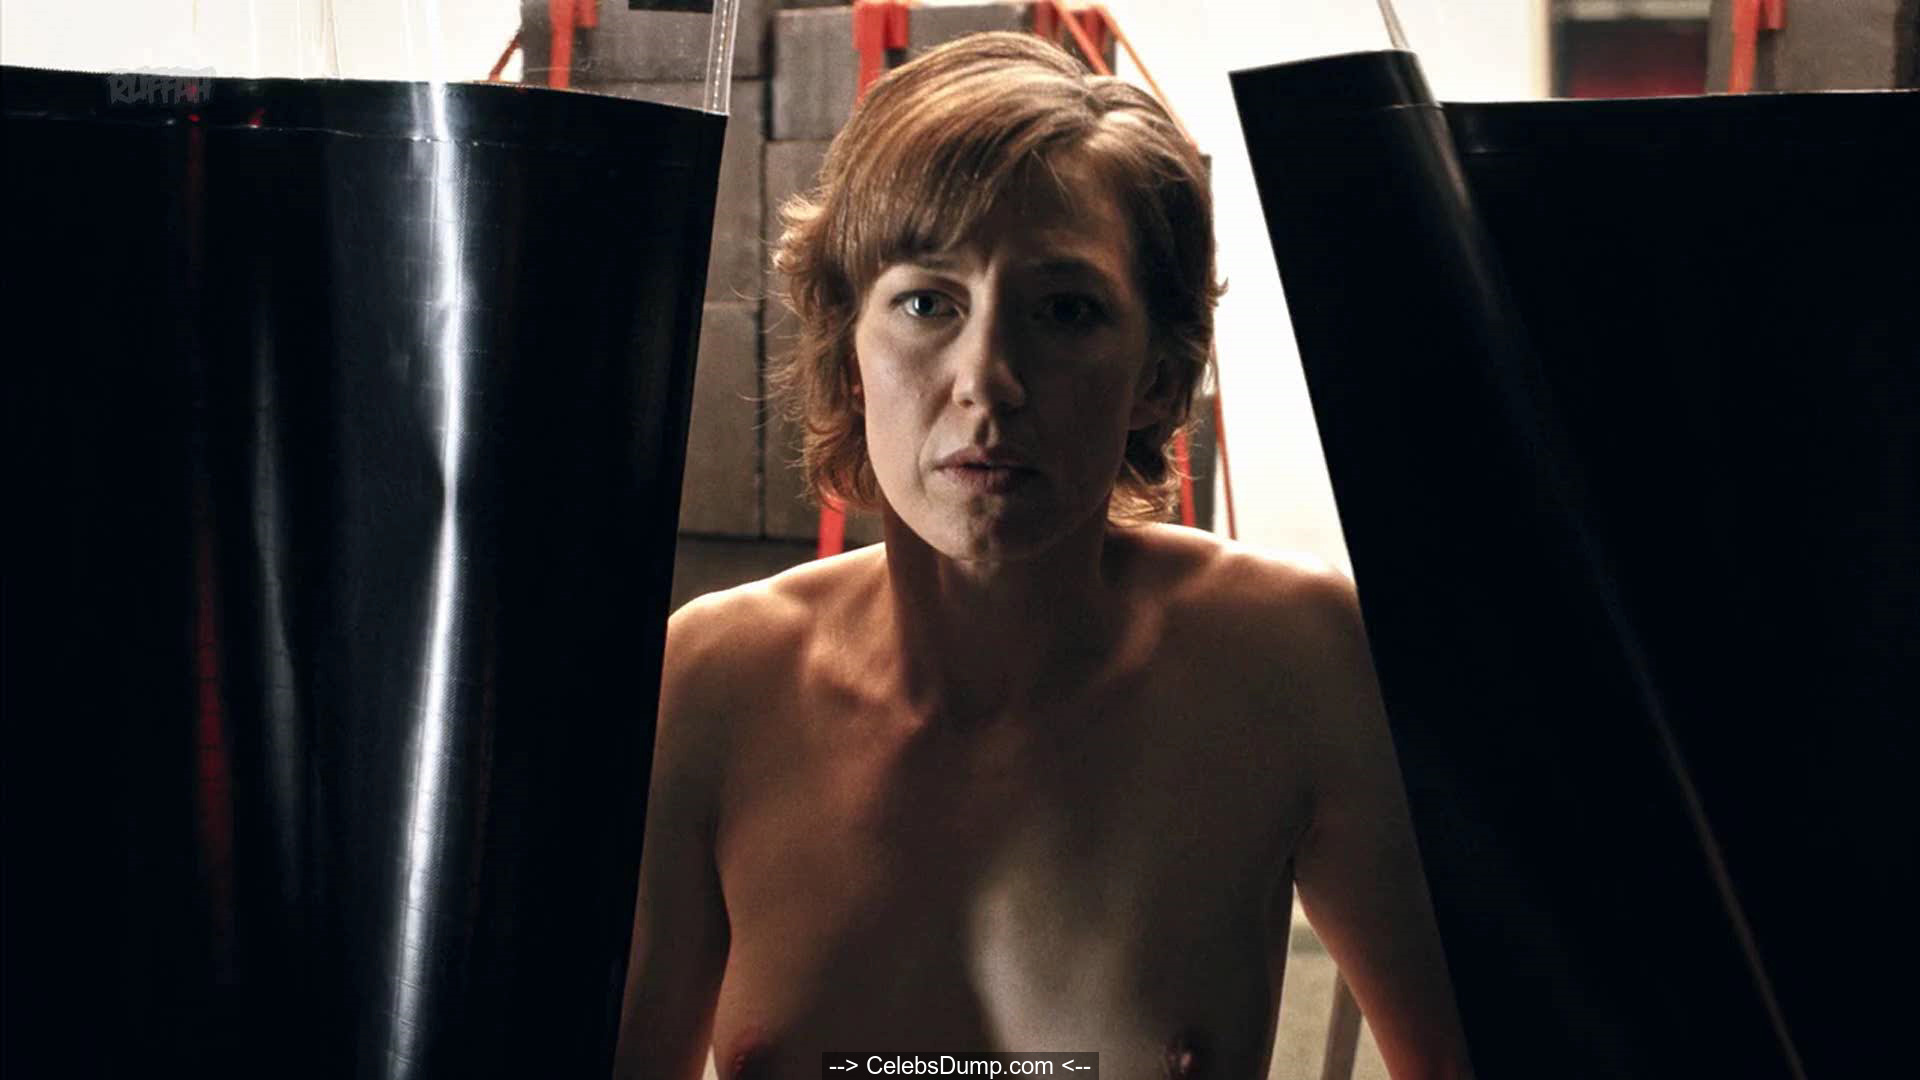 Carrie coon naked